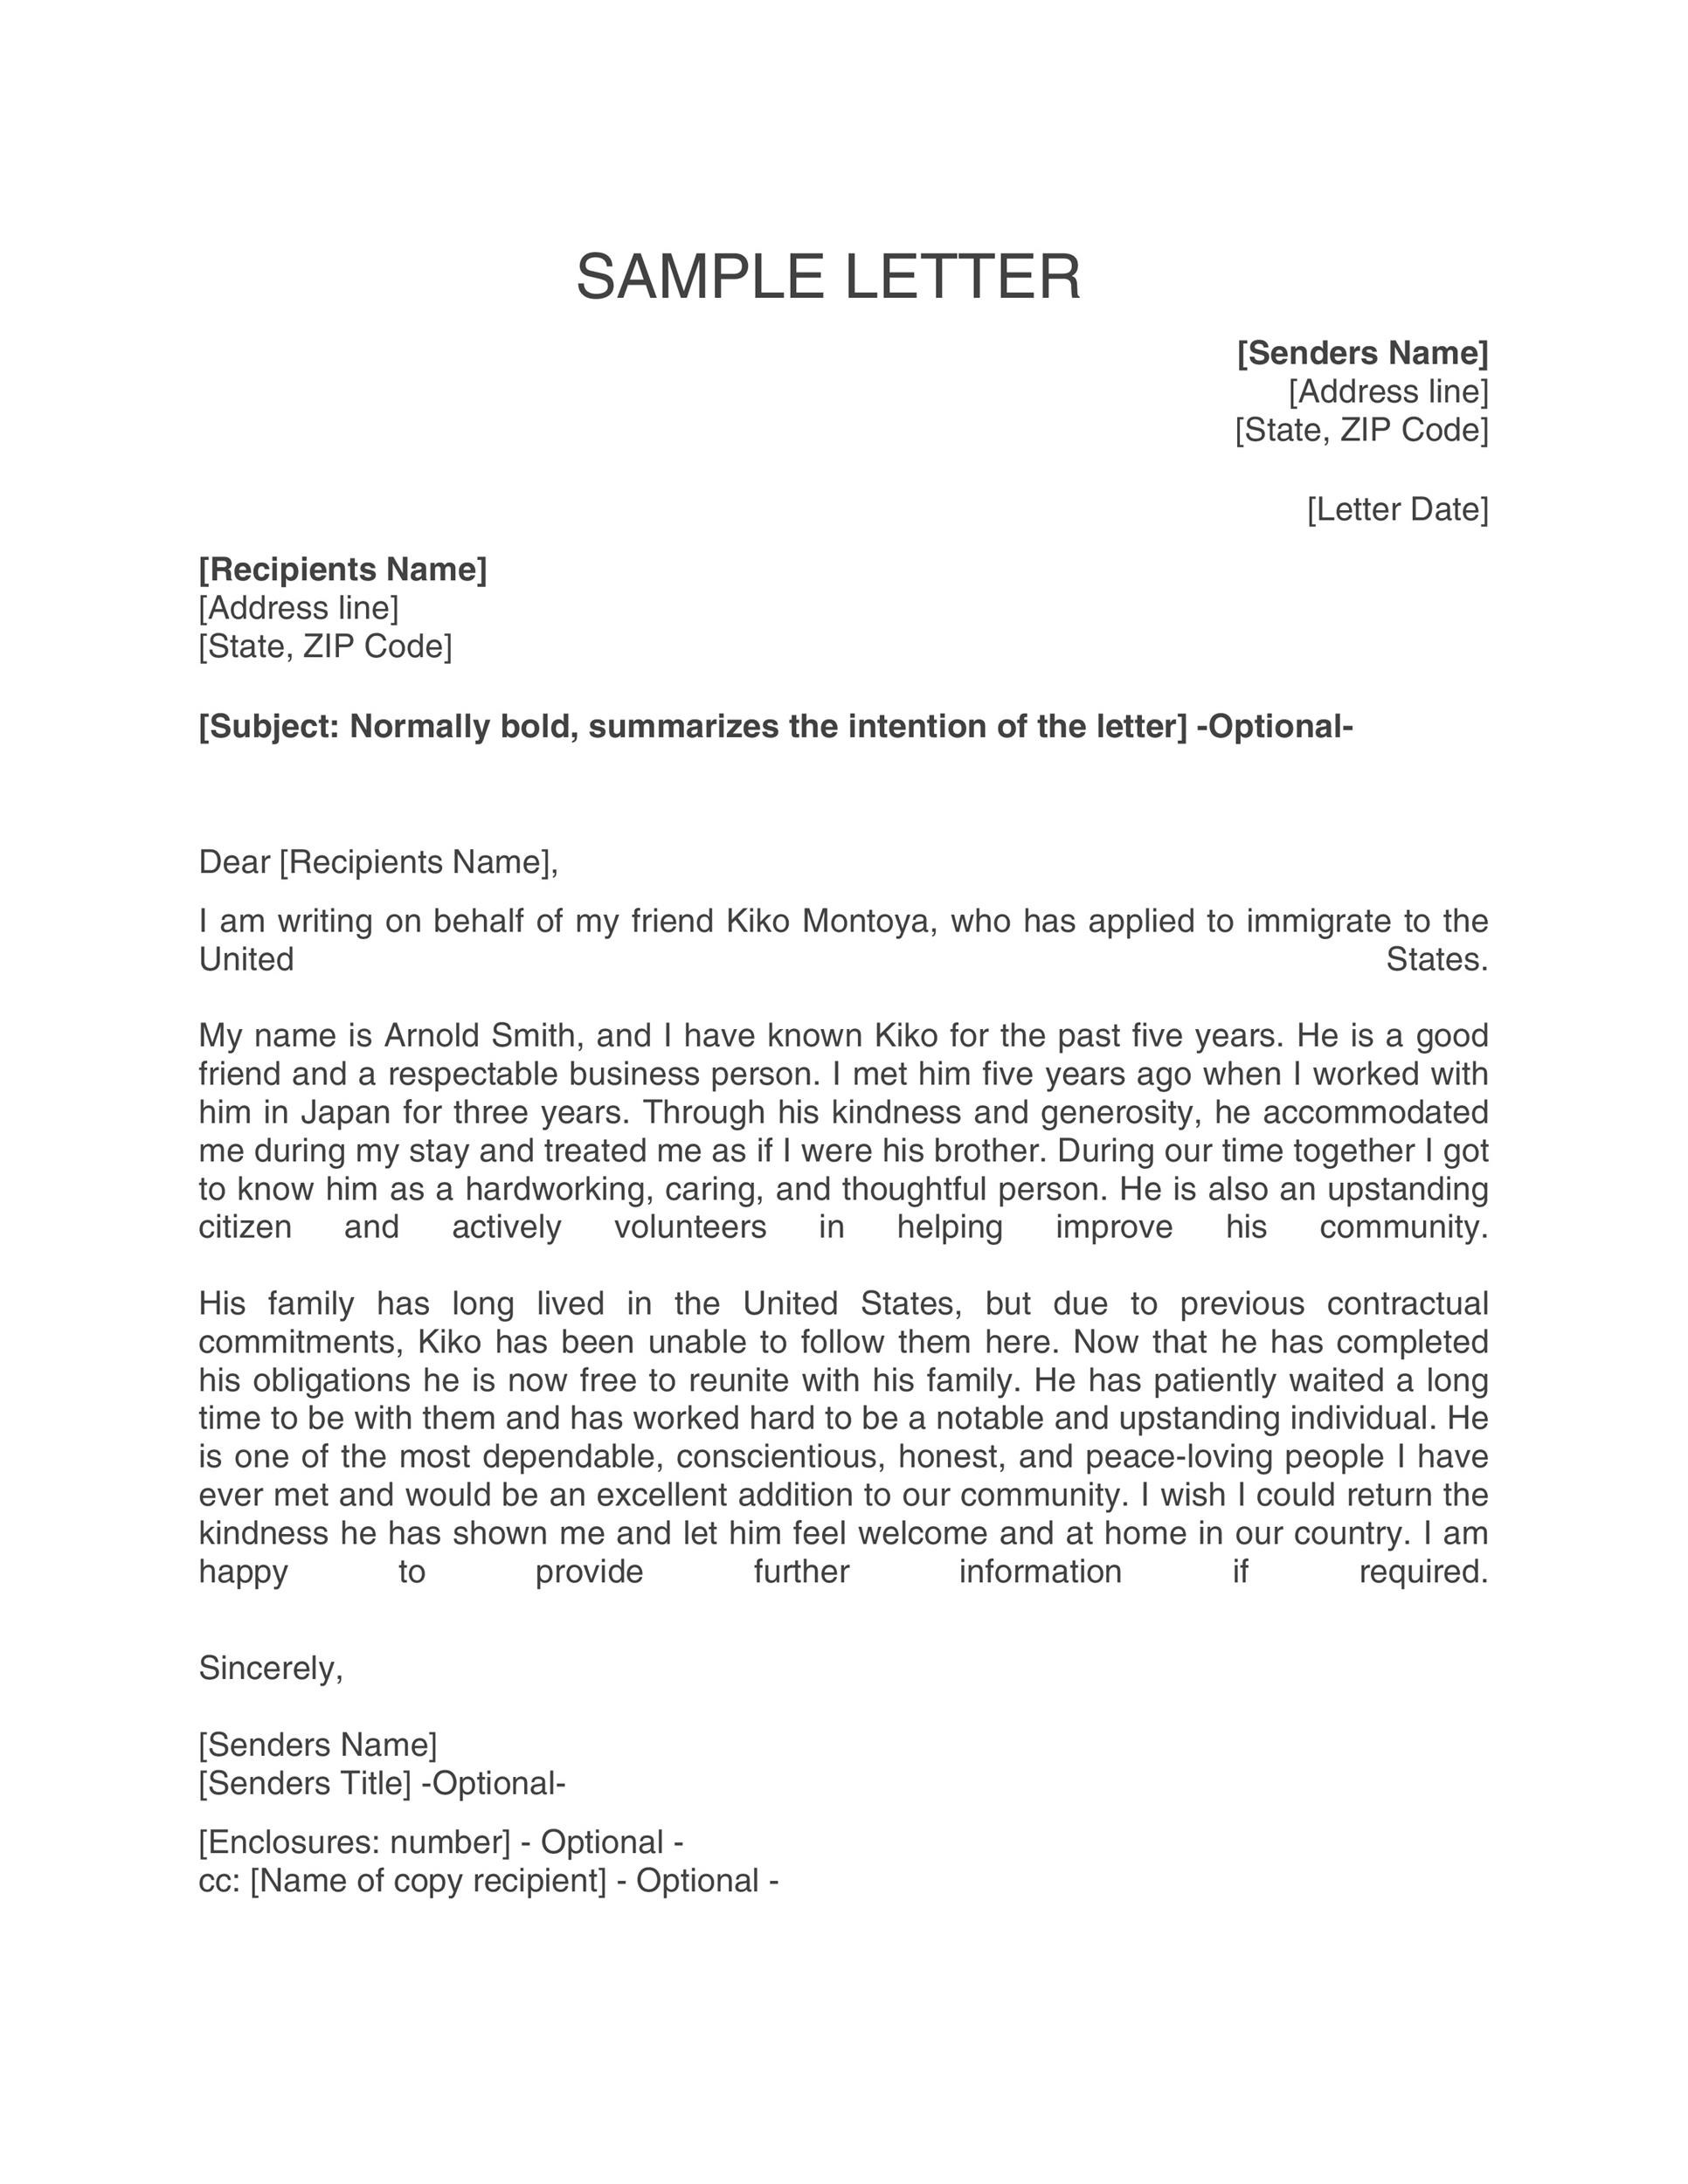 Church Recommendation Letter For Immigration from templatelab.com